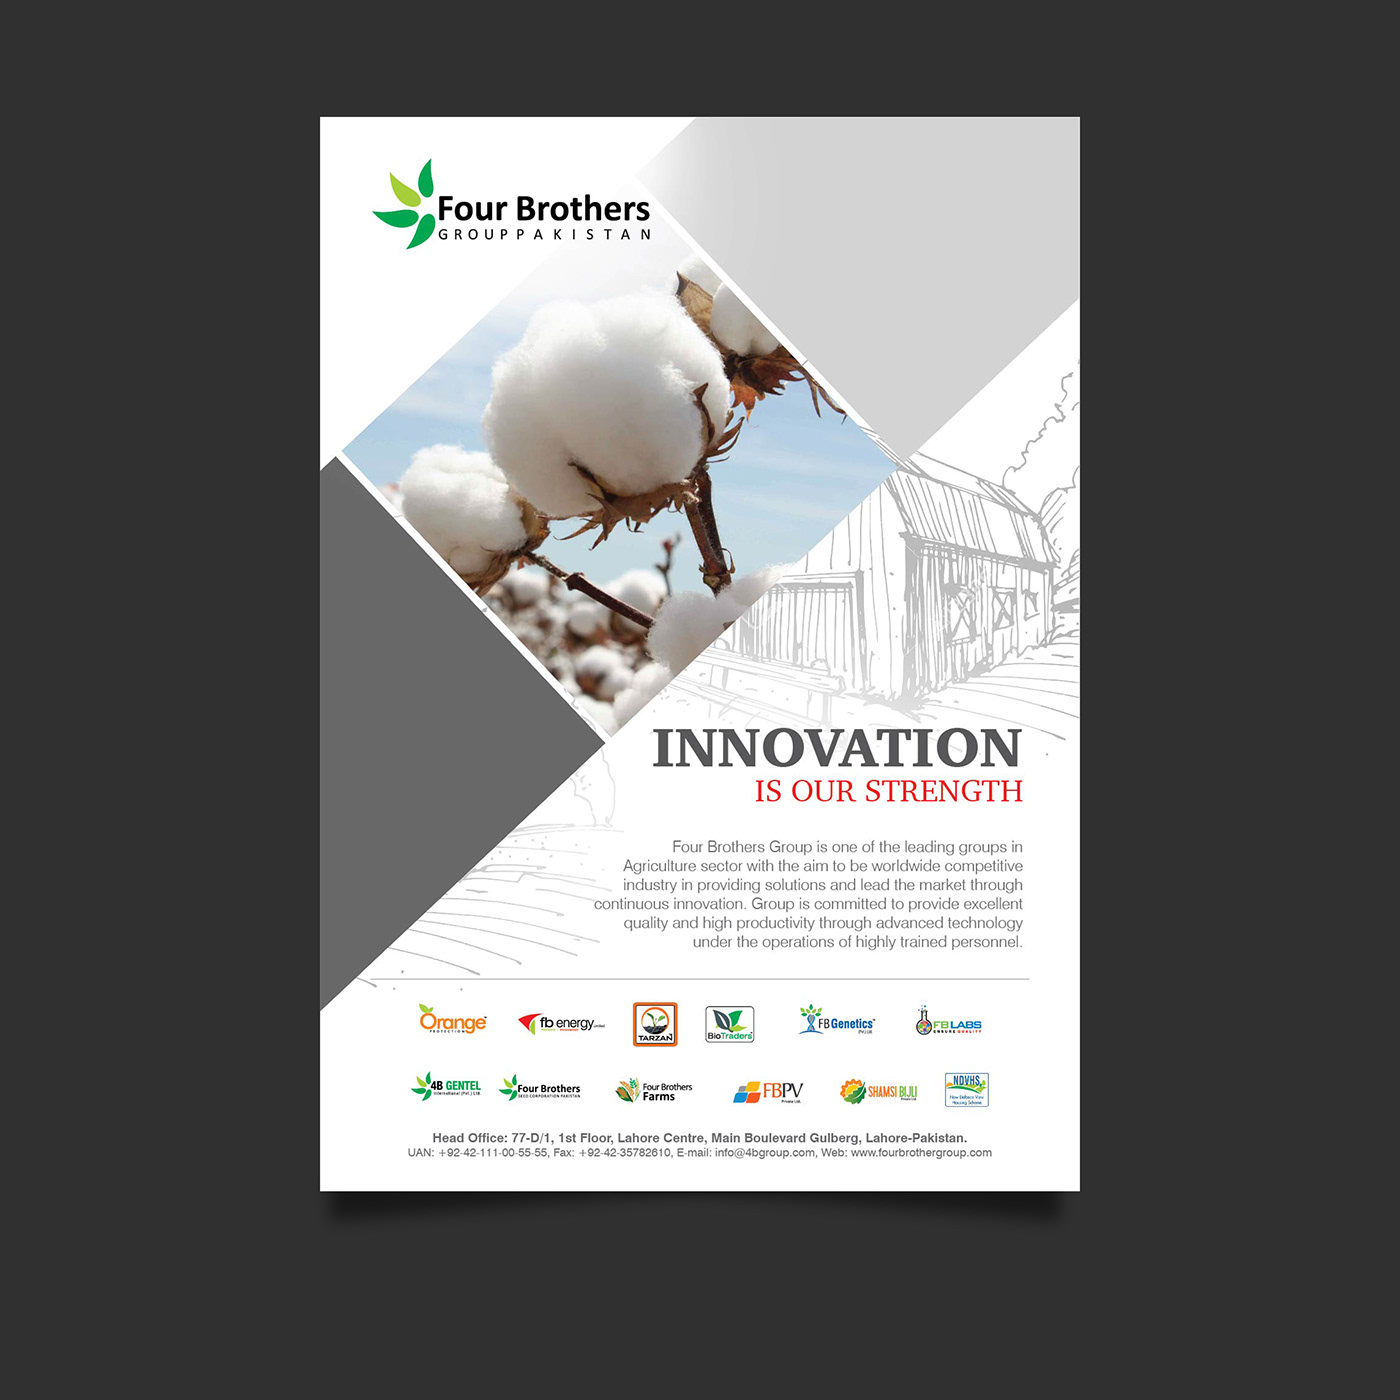 ad advertisement agriculture chamber of commerce design Electronic Media industry design innovation Magazine Ad print ad